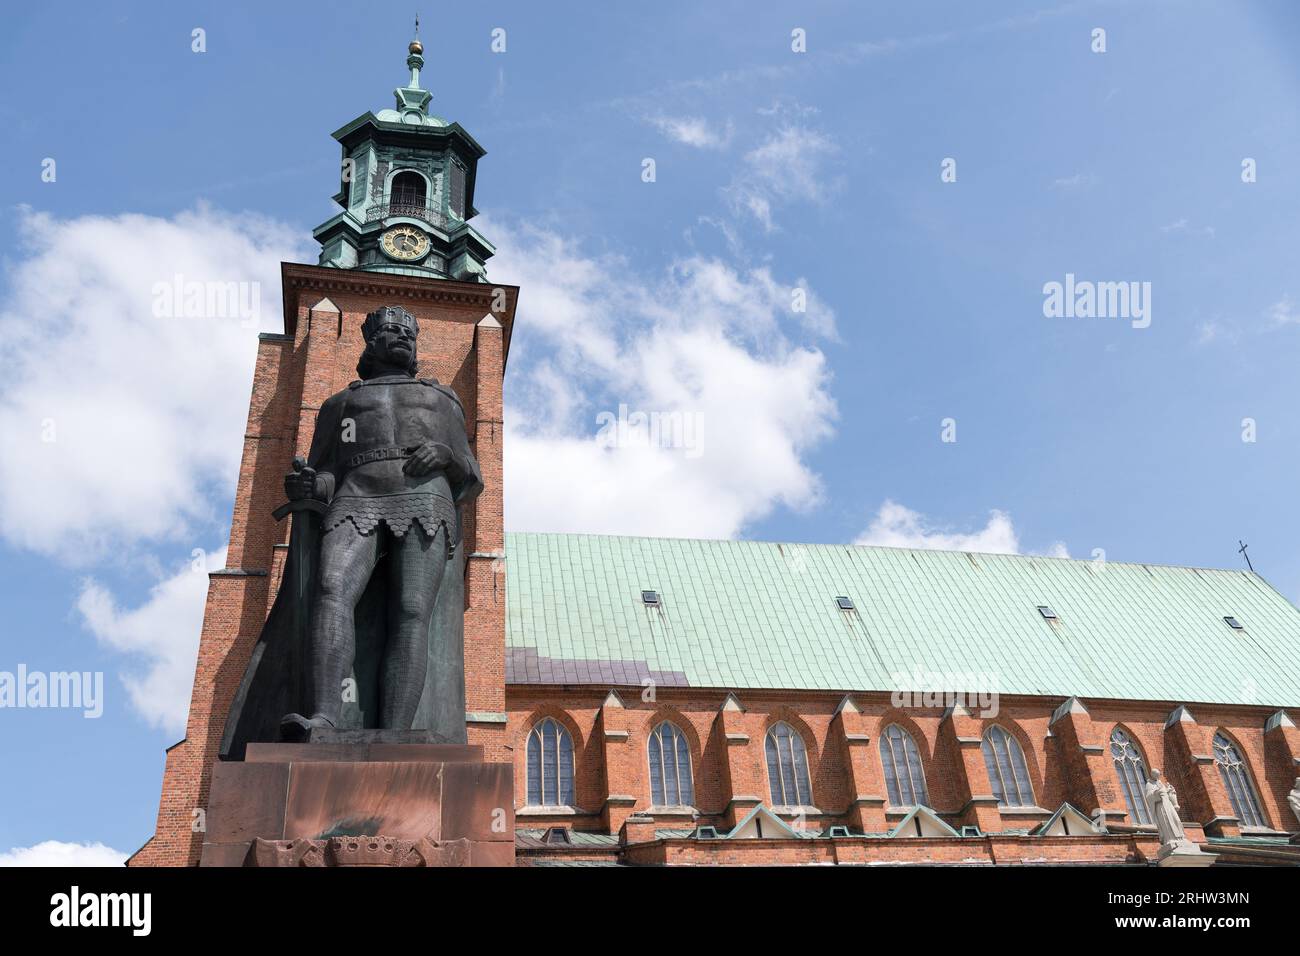 Statue of Boleslaw I Chrobry first king of Poland in front of the ...